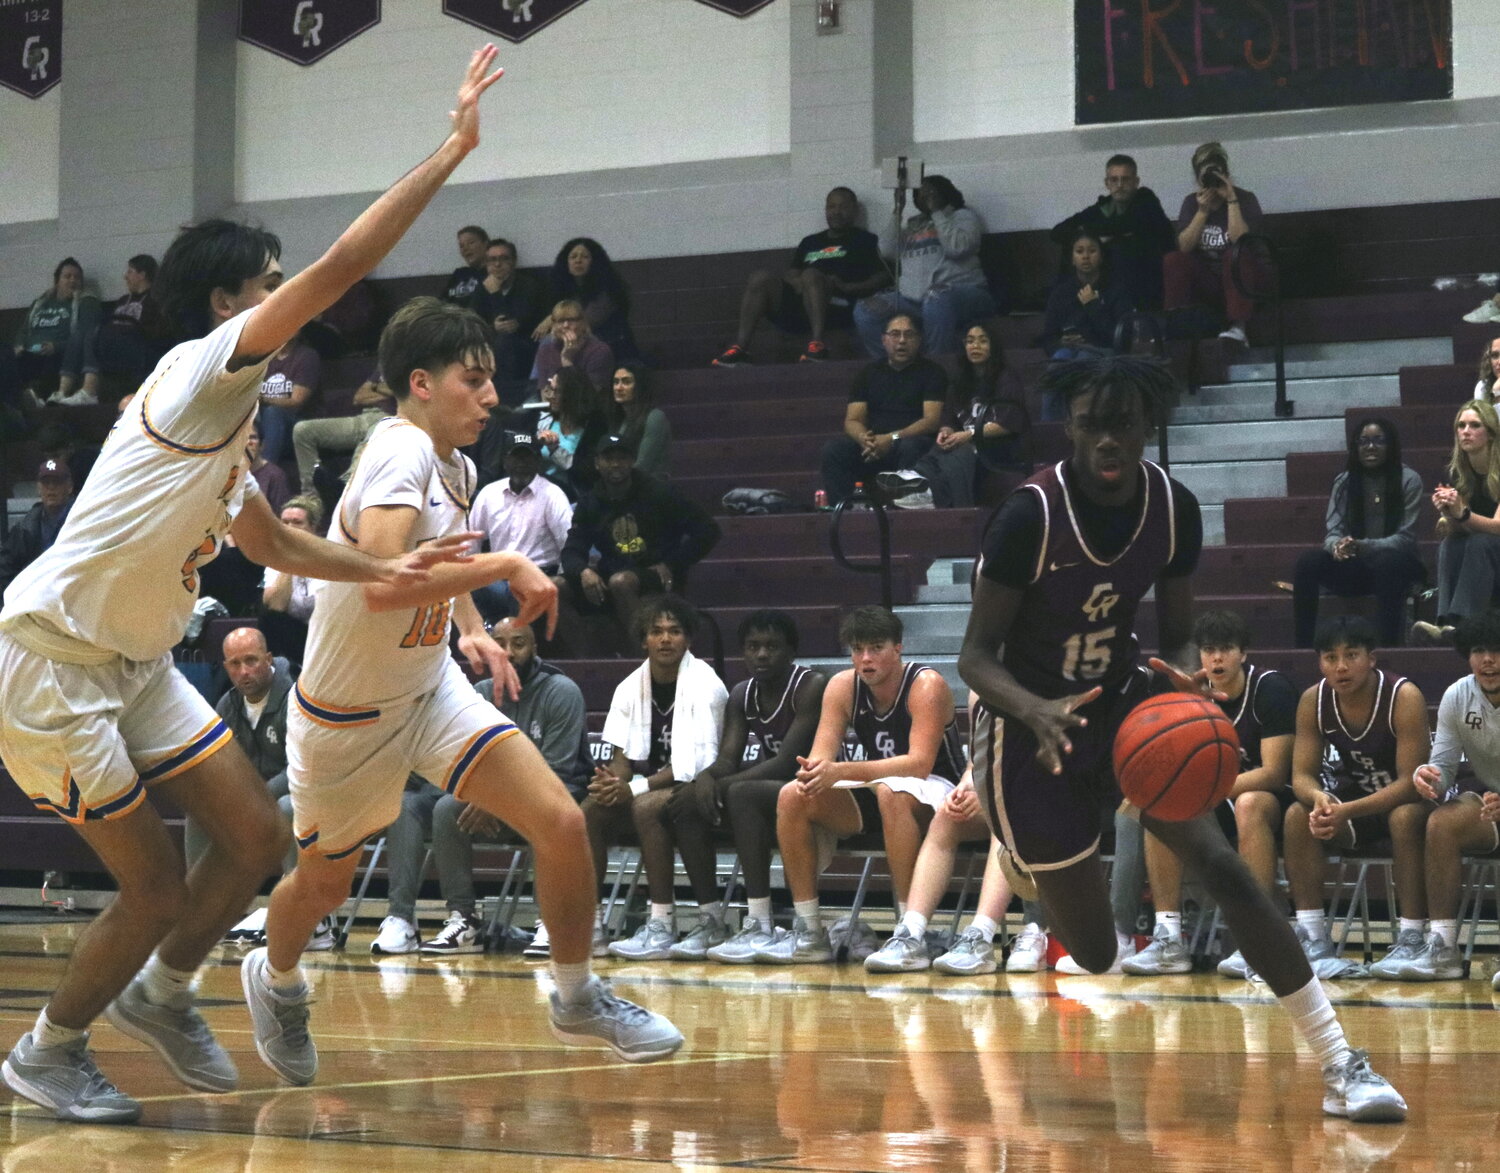 Pat Origo drives to the basket during Friday's game between Cinco Ranch and Klein at the Cinco Ranch gym.